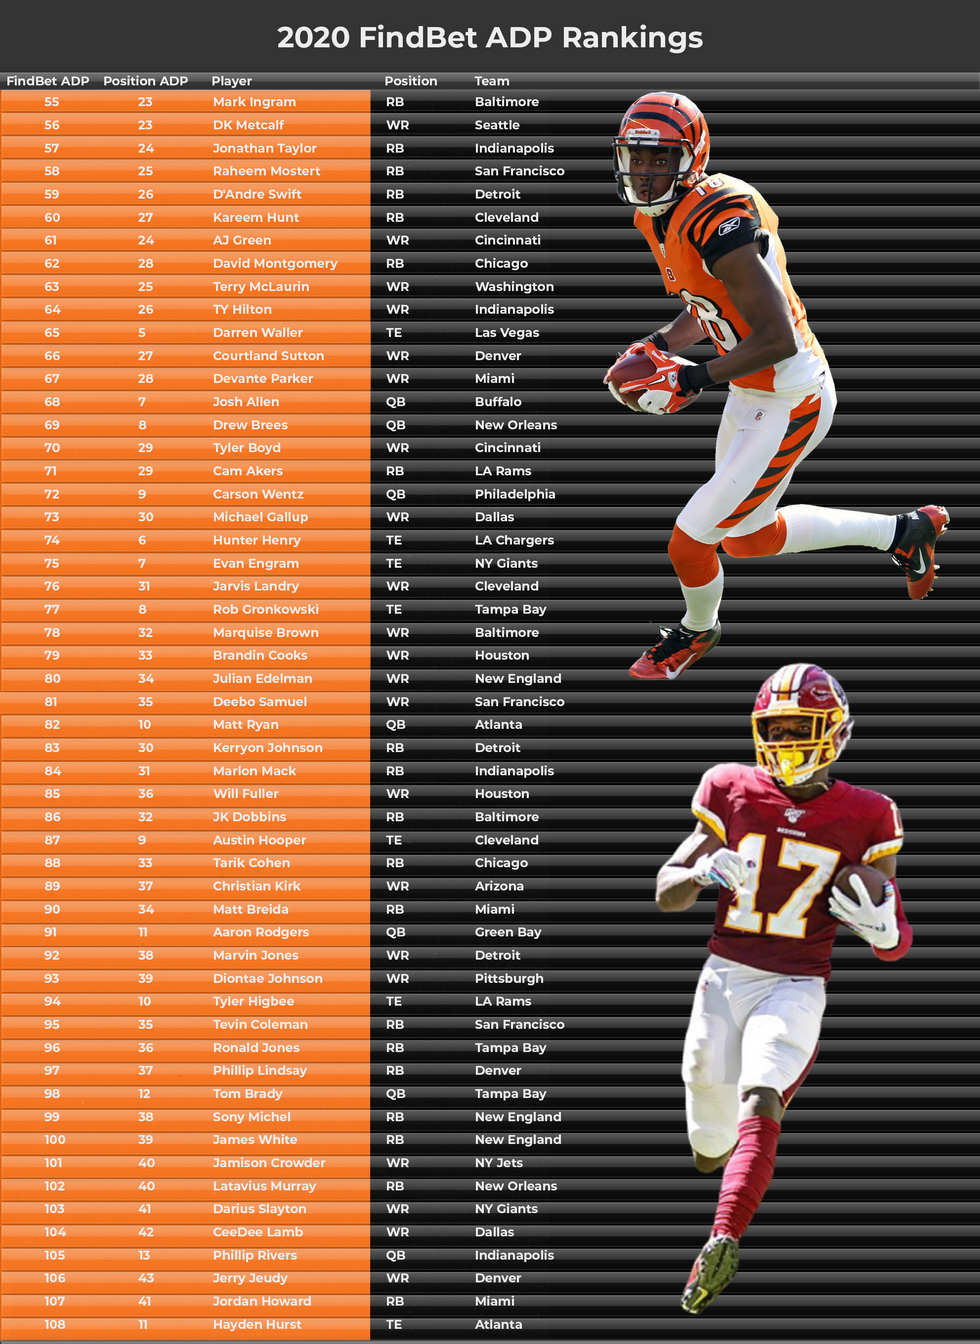 Fantasy Football ADP Rankings for 2020 - Find Bet